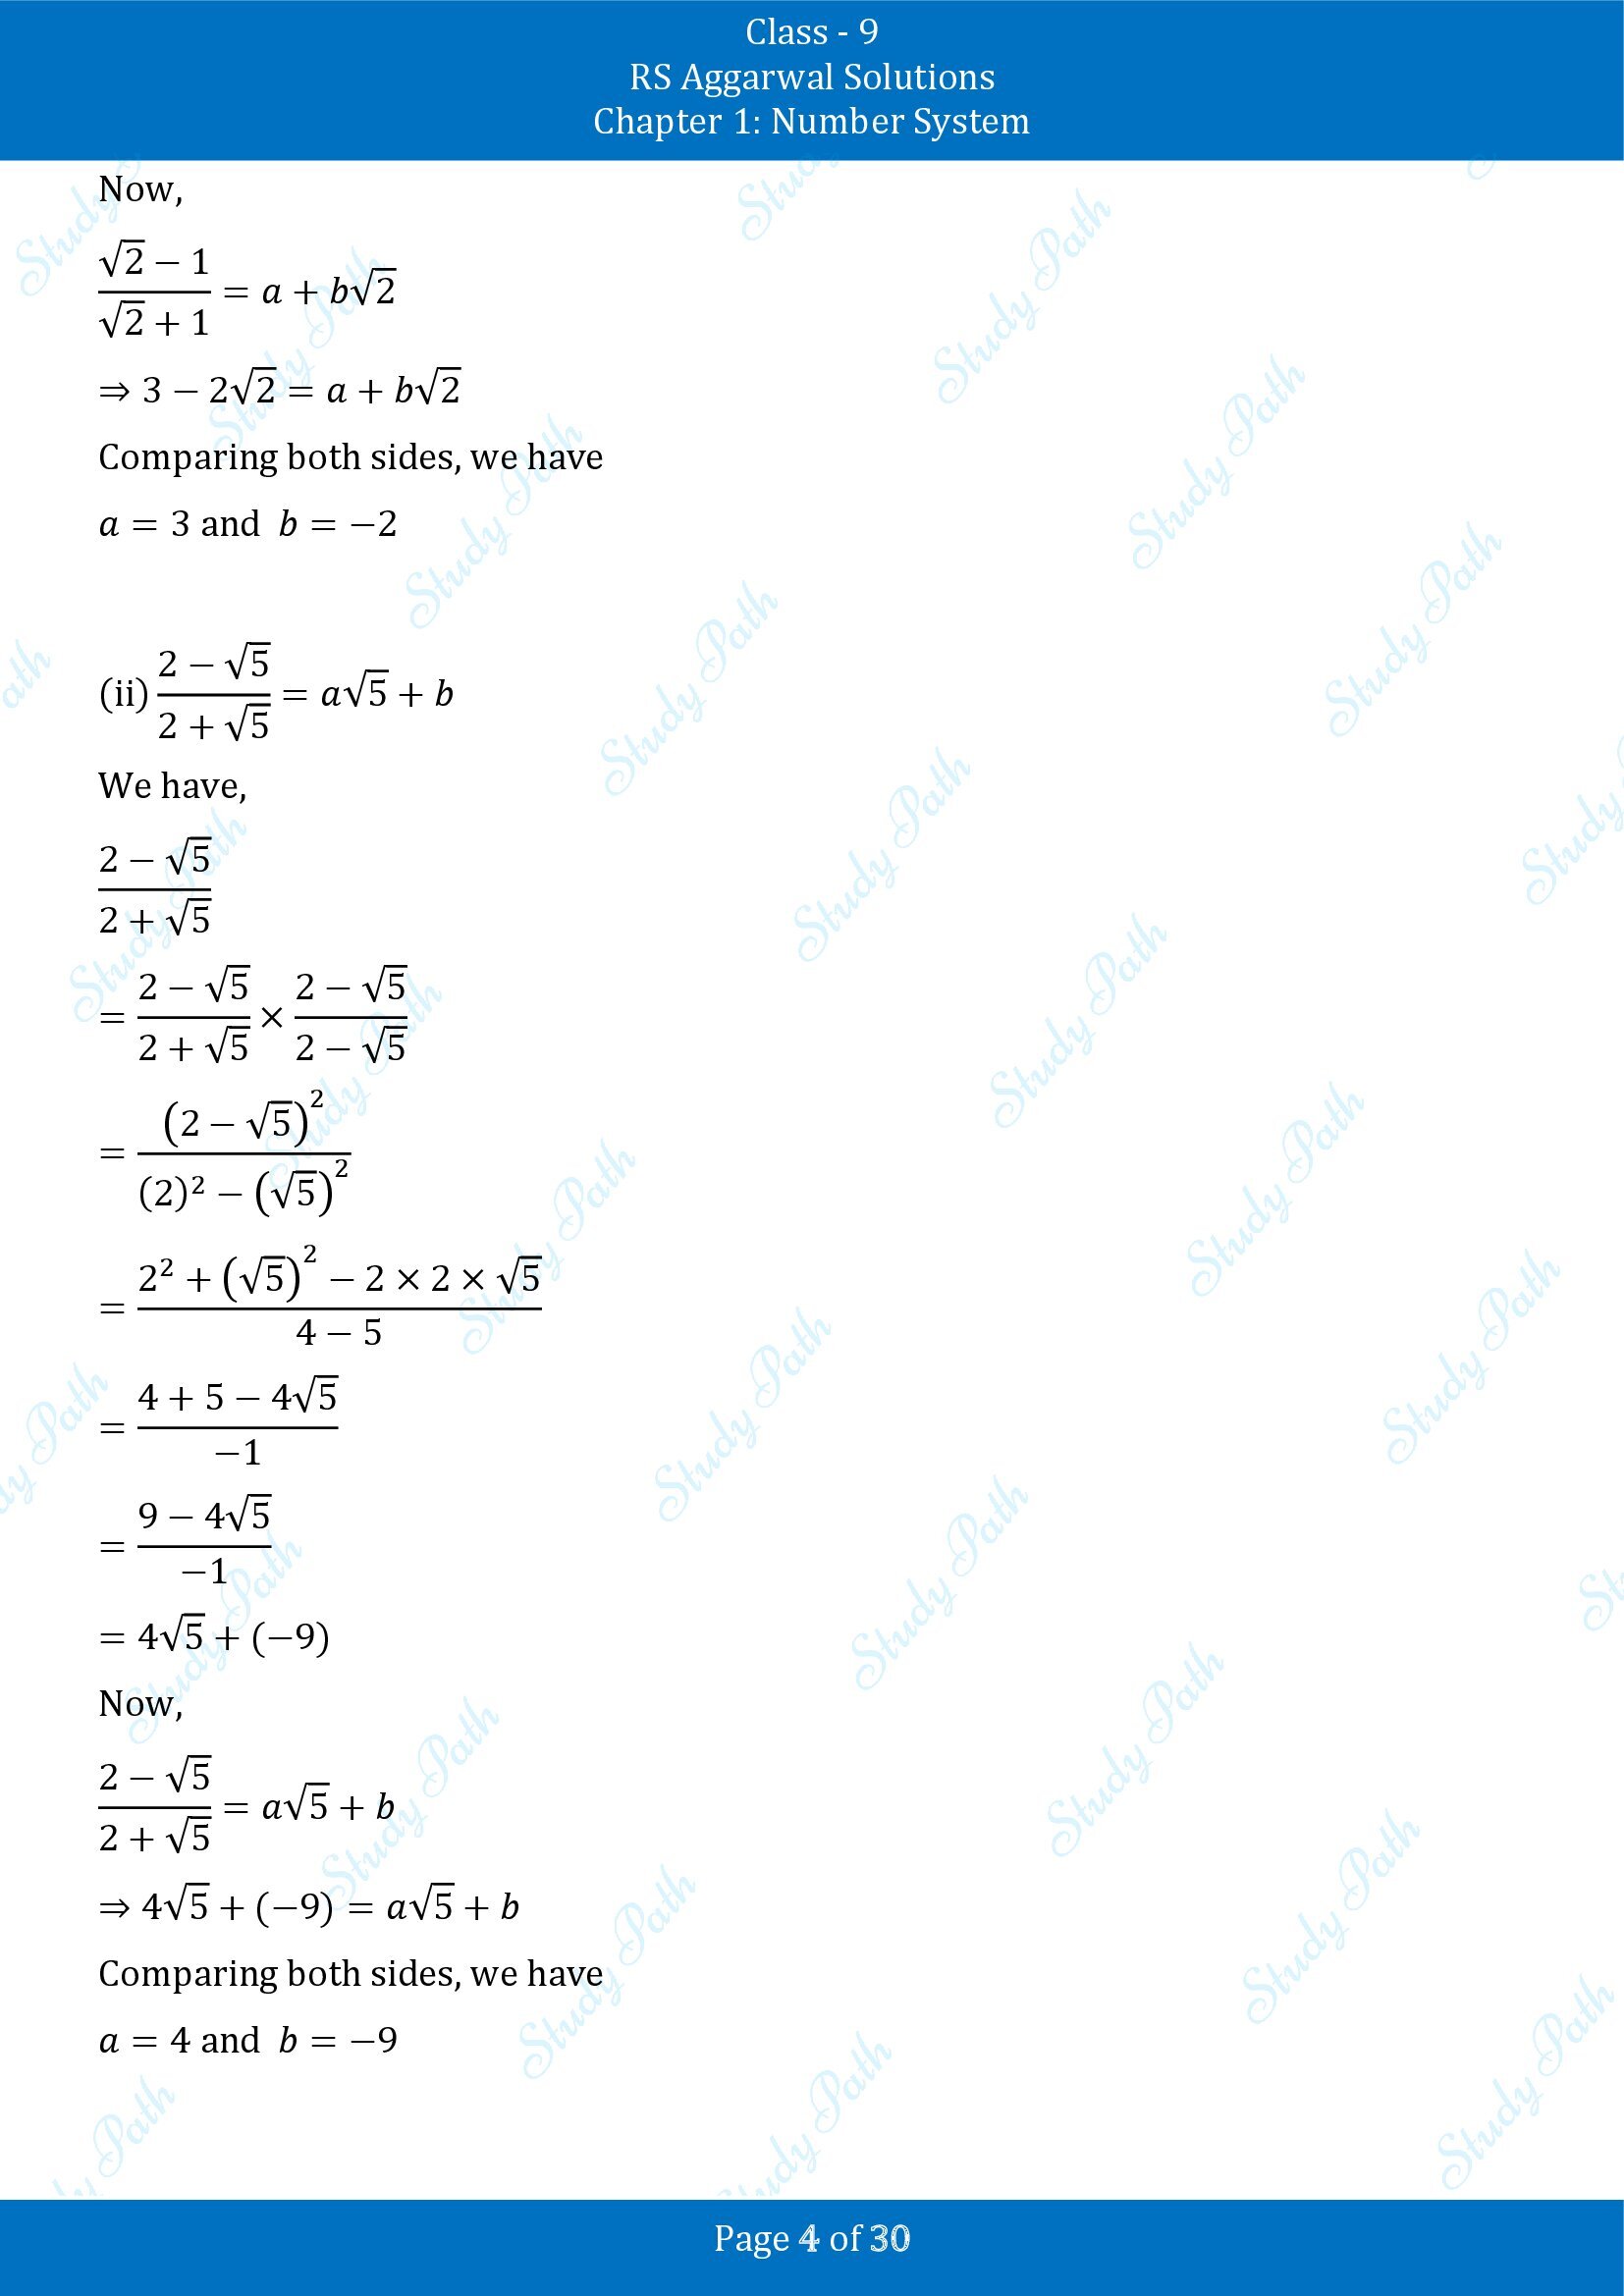 RS Aggarwal Solutions Class 9 Chapter 1 Number System Exercise 1F 00004